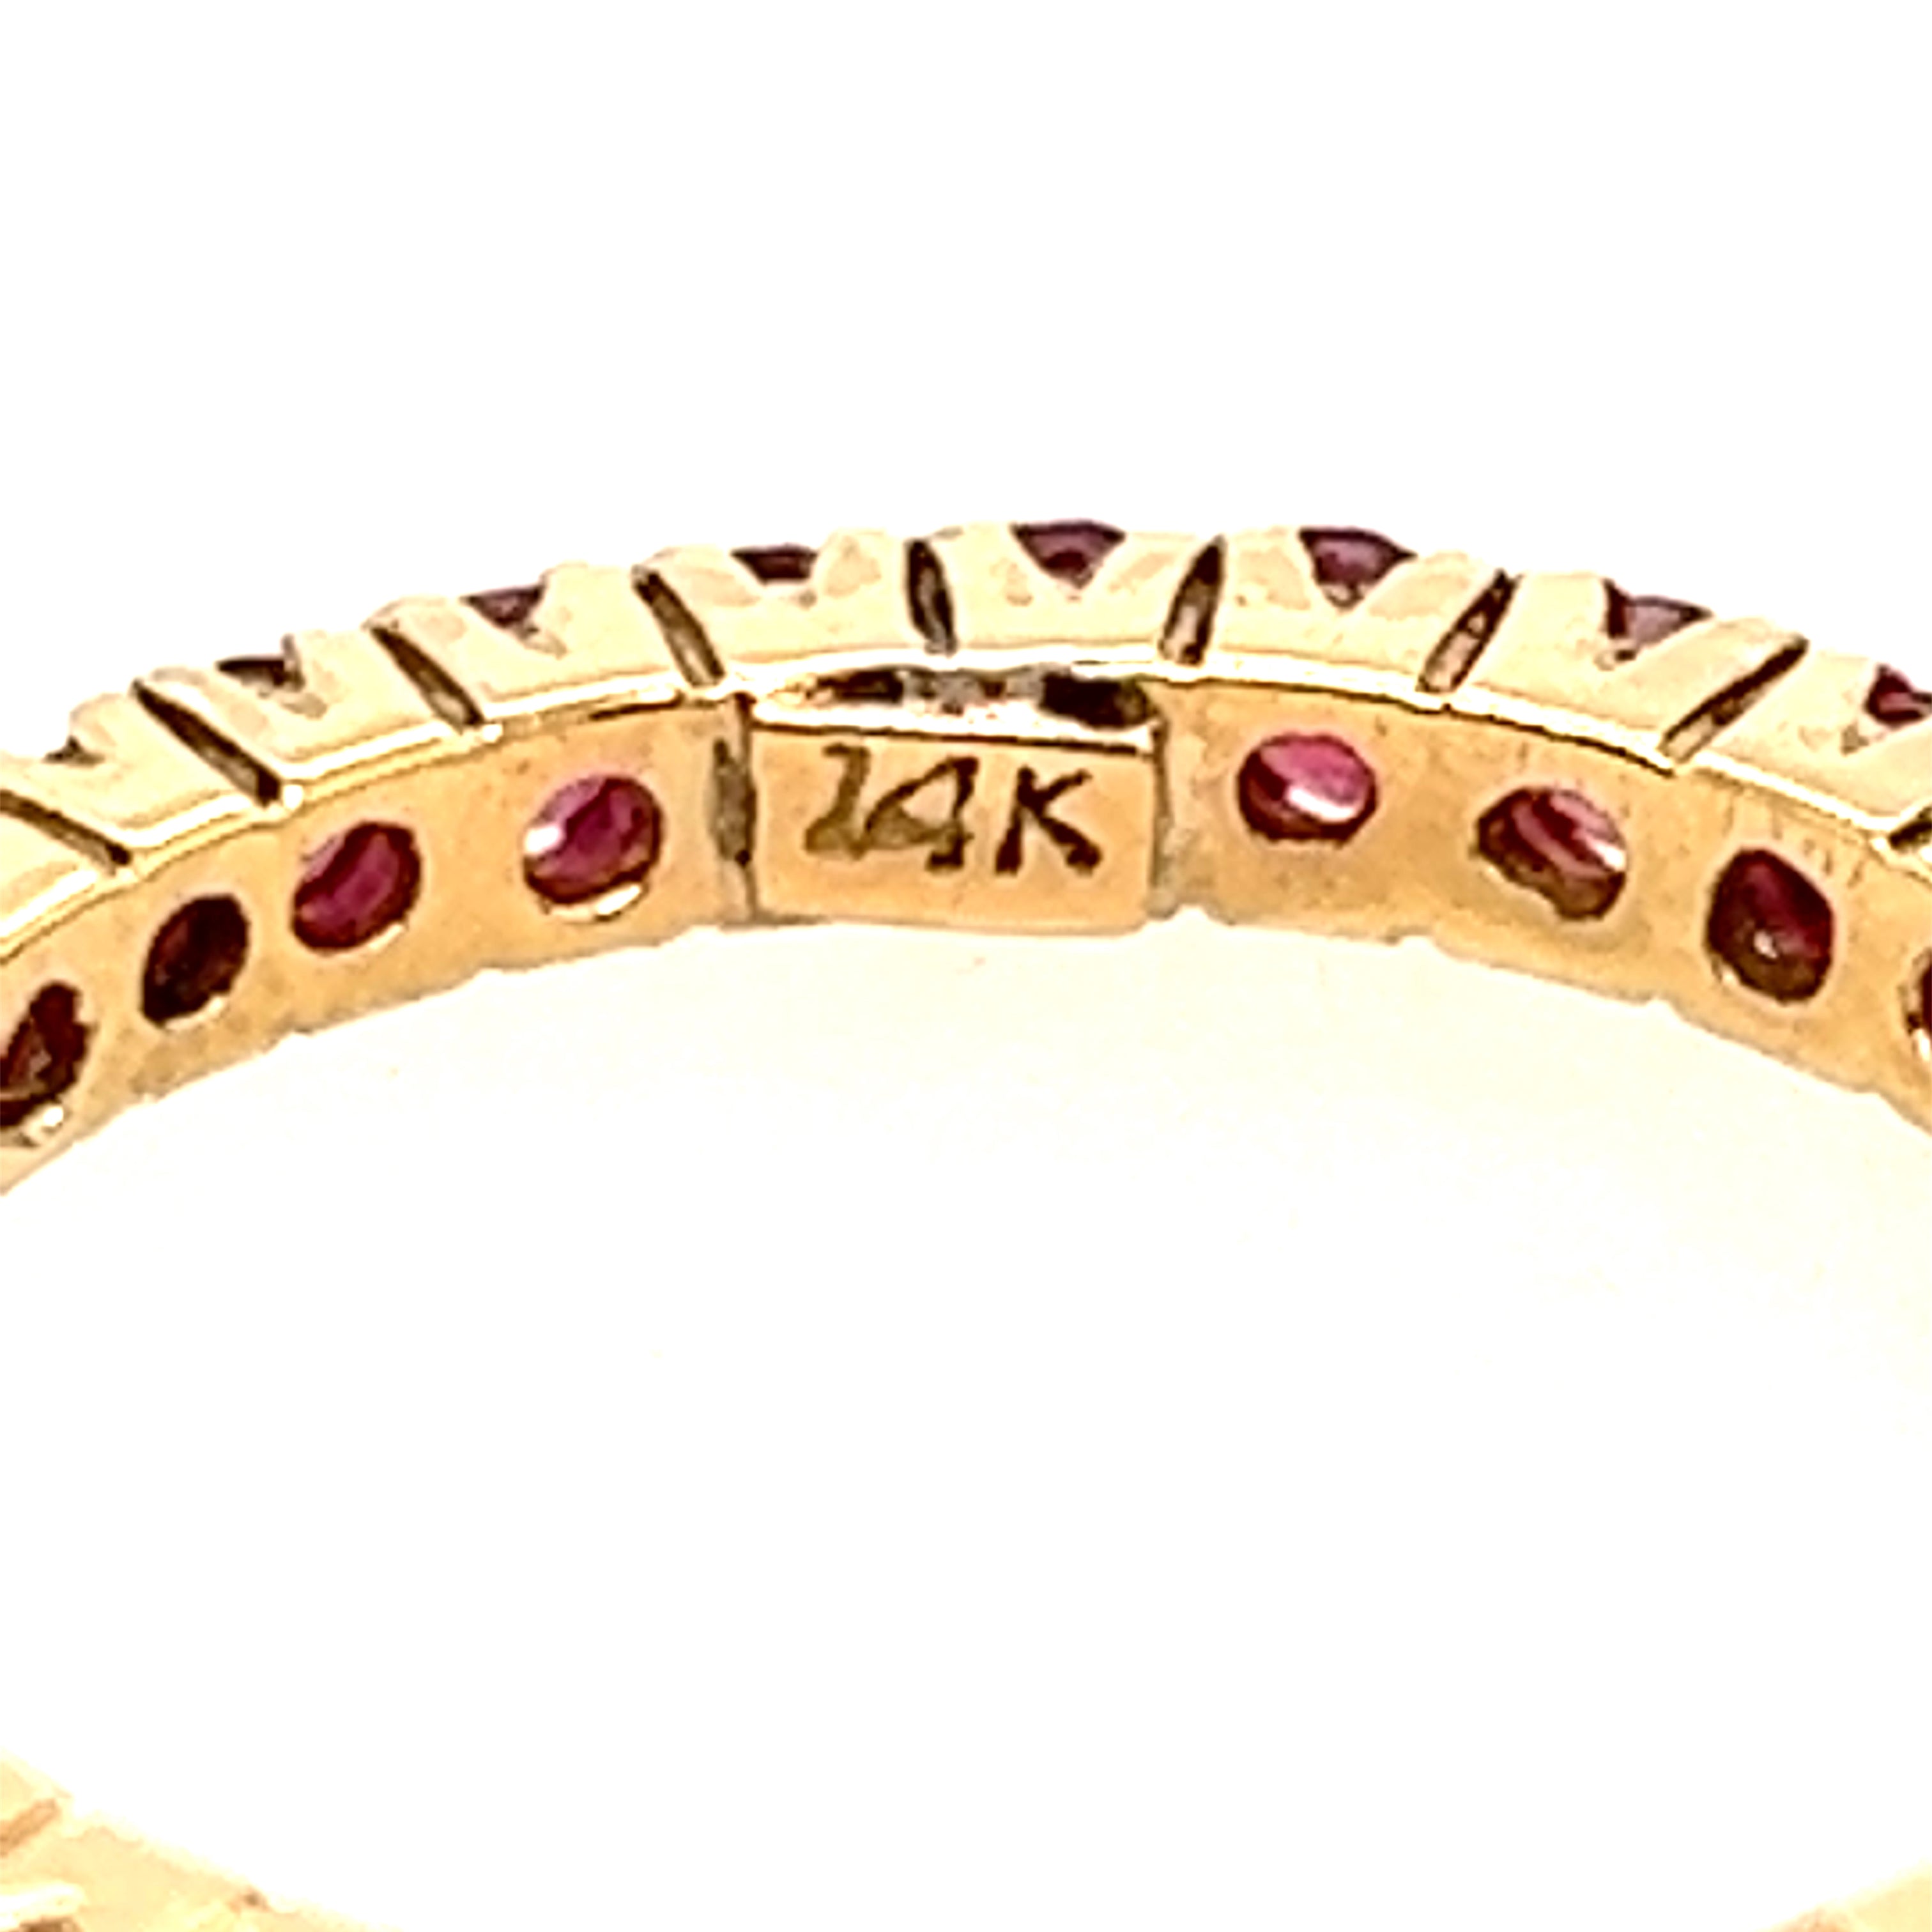 14ct Yellow Gold & Ruby Eternity Full Circle Ring